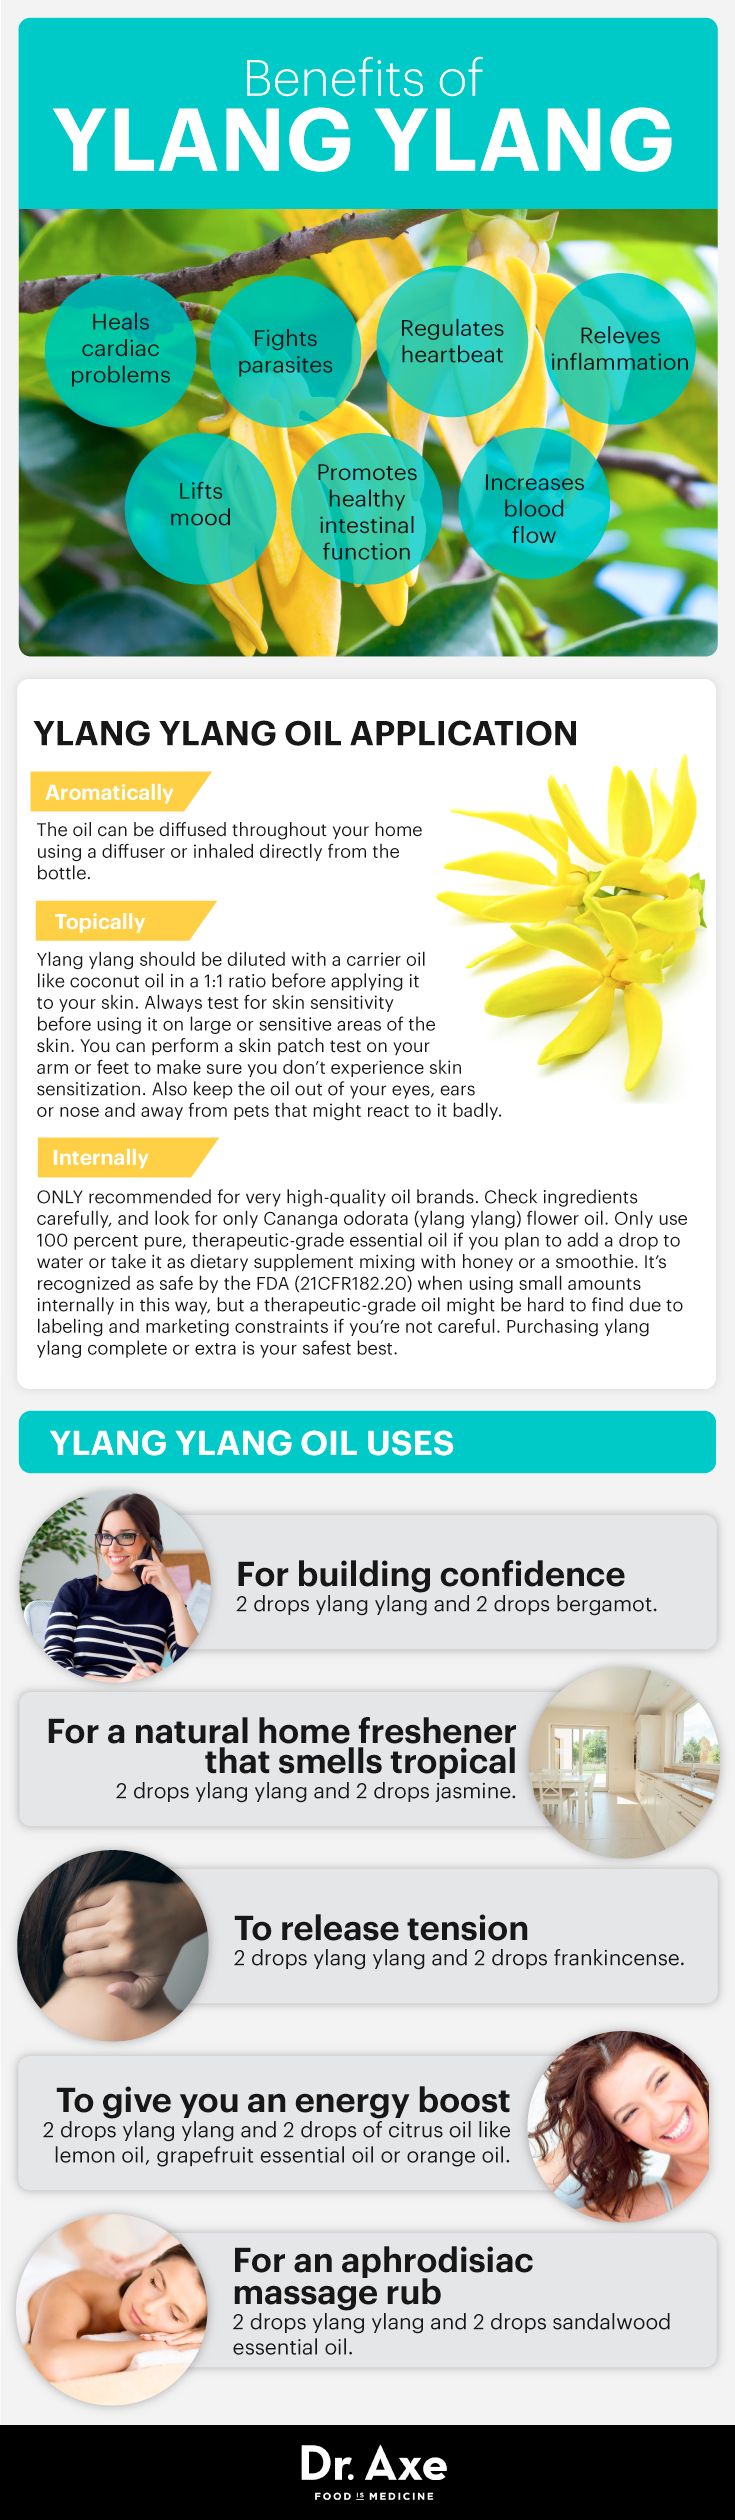 Benefits Of Ylang Ylang Essential Oil For Your Health, Mood And Energy Infogrpahic